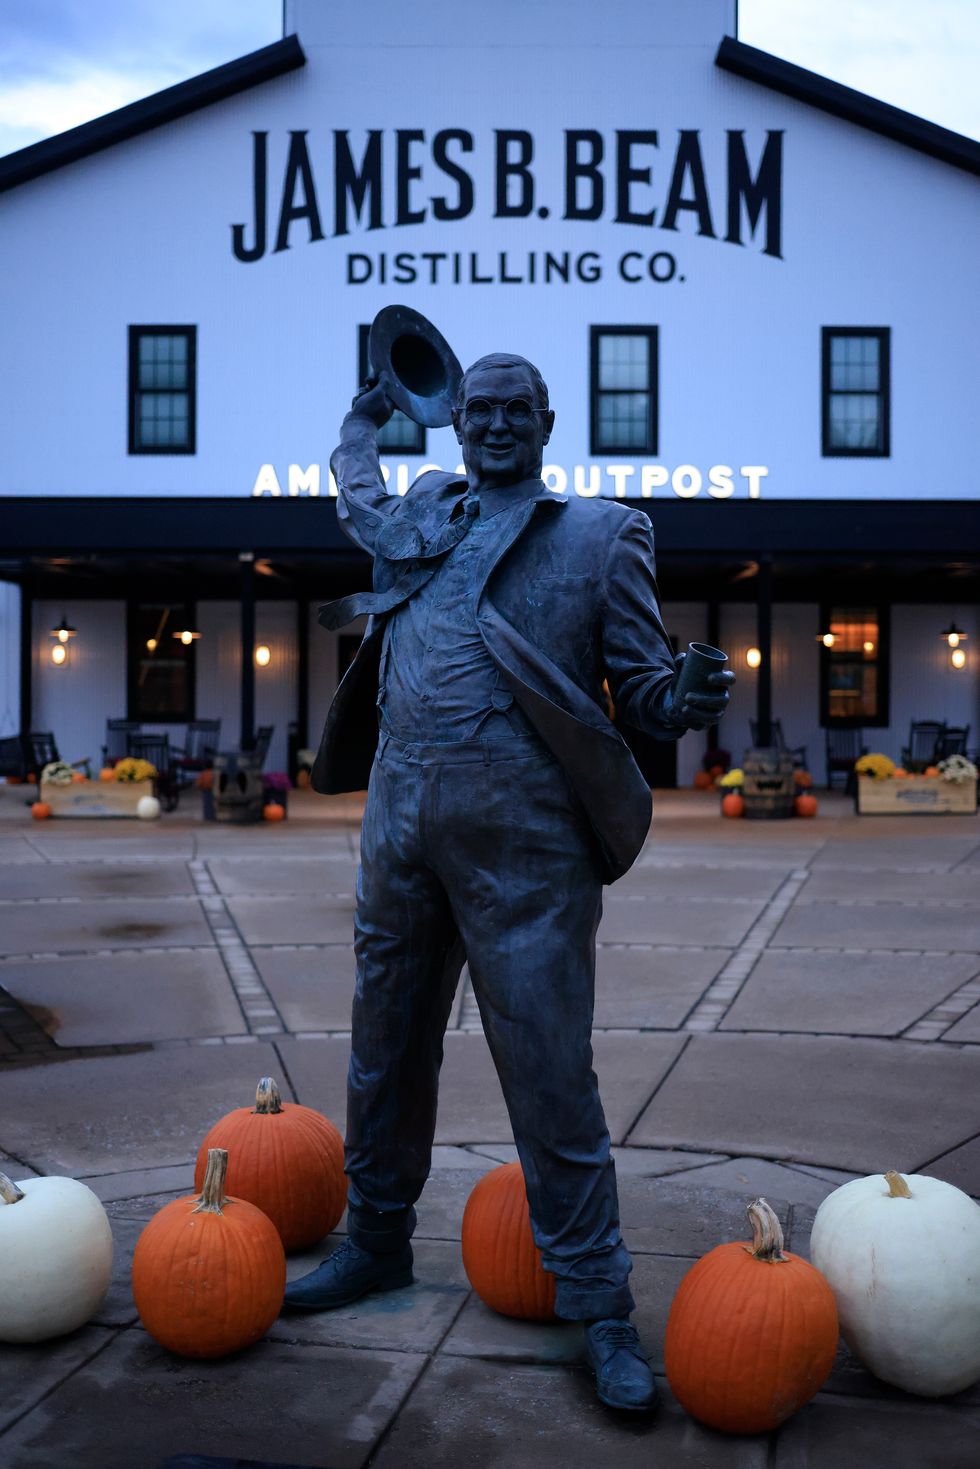 a statue of jim beam with pumpkins outside the american outpost store at james beam distillery co